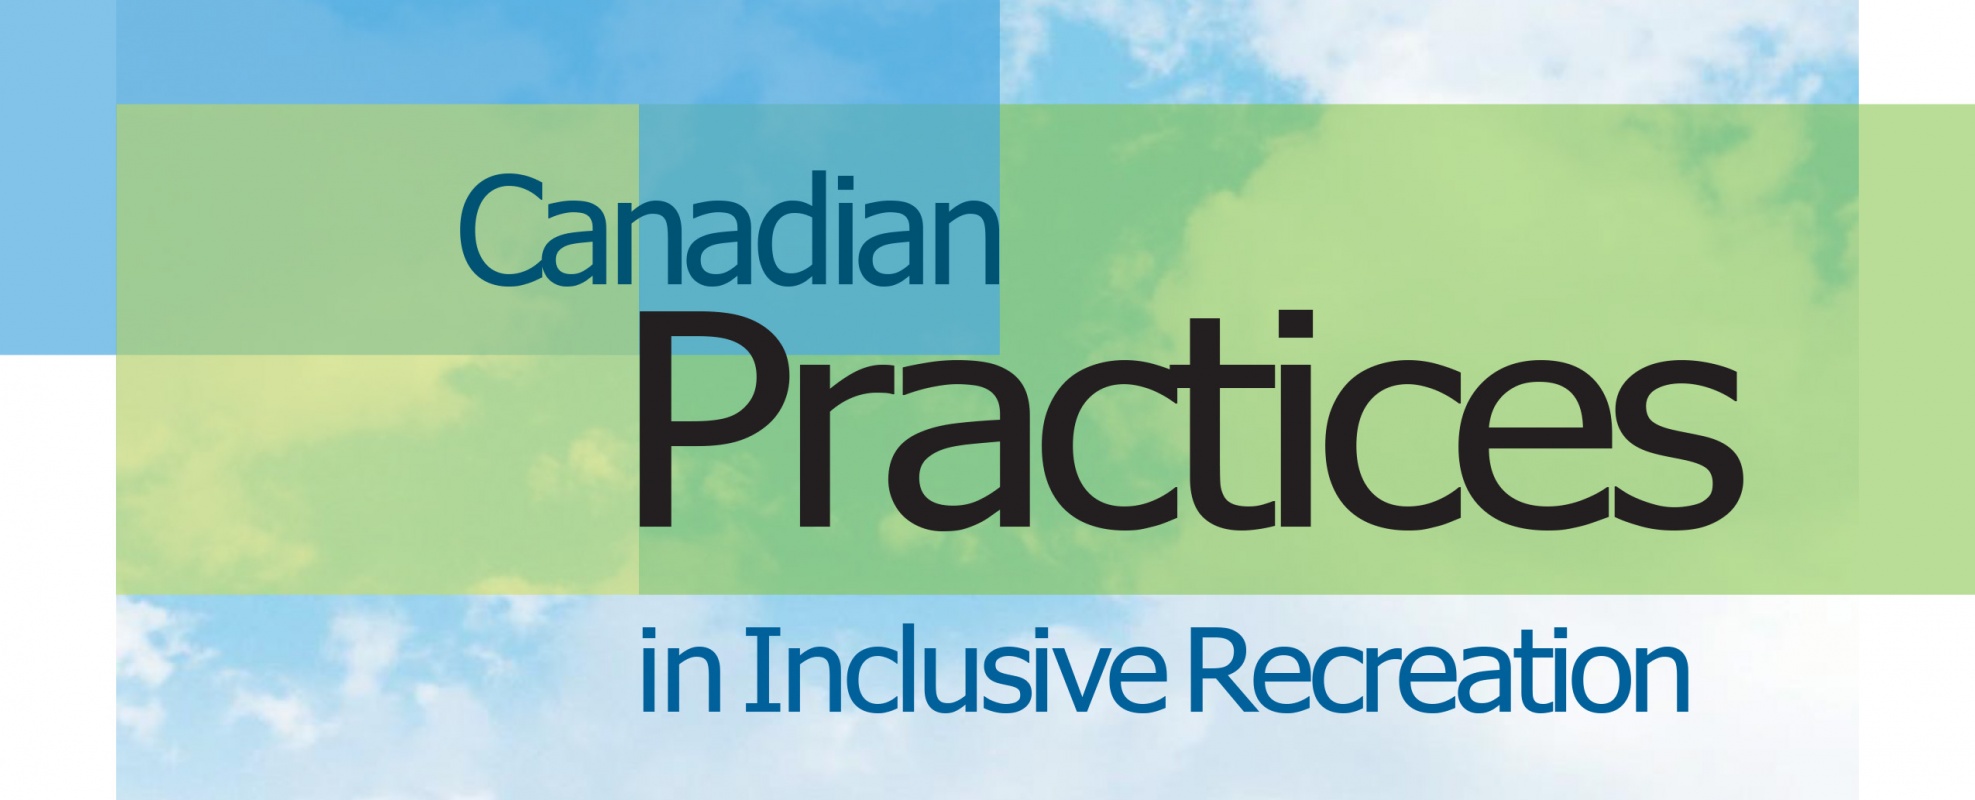 Sky and clouds behind the words Canadian Practices in Inclusive Recreation